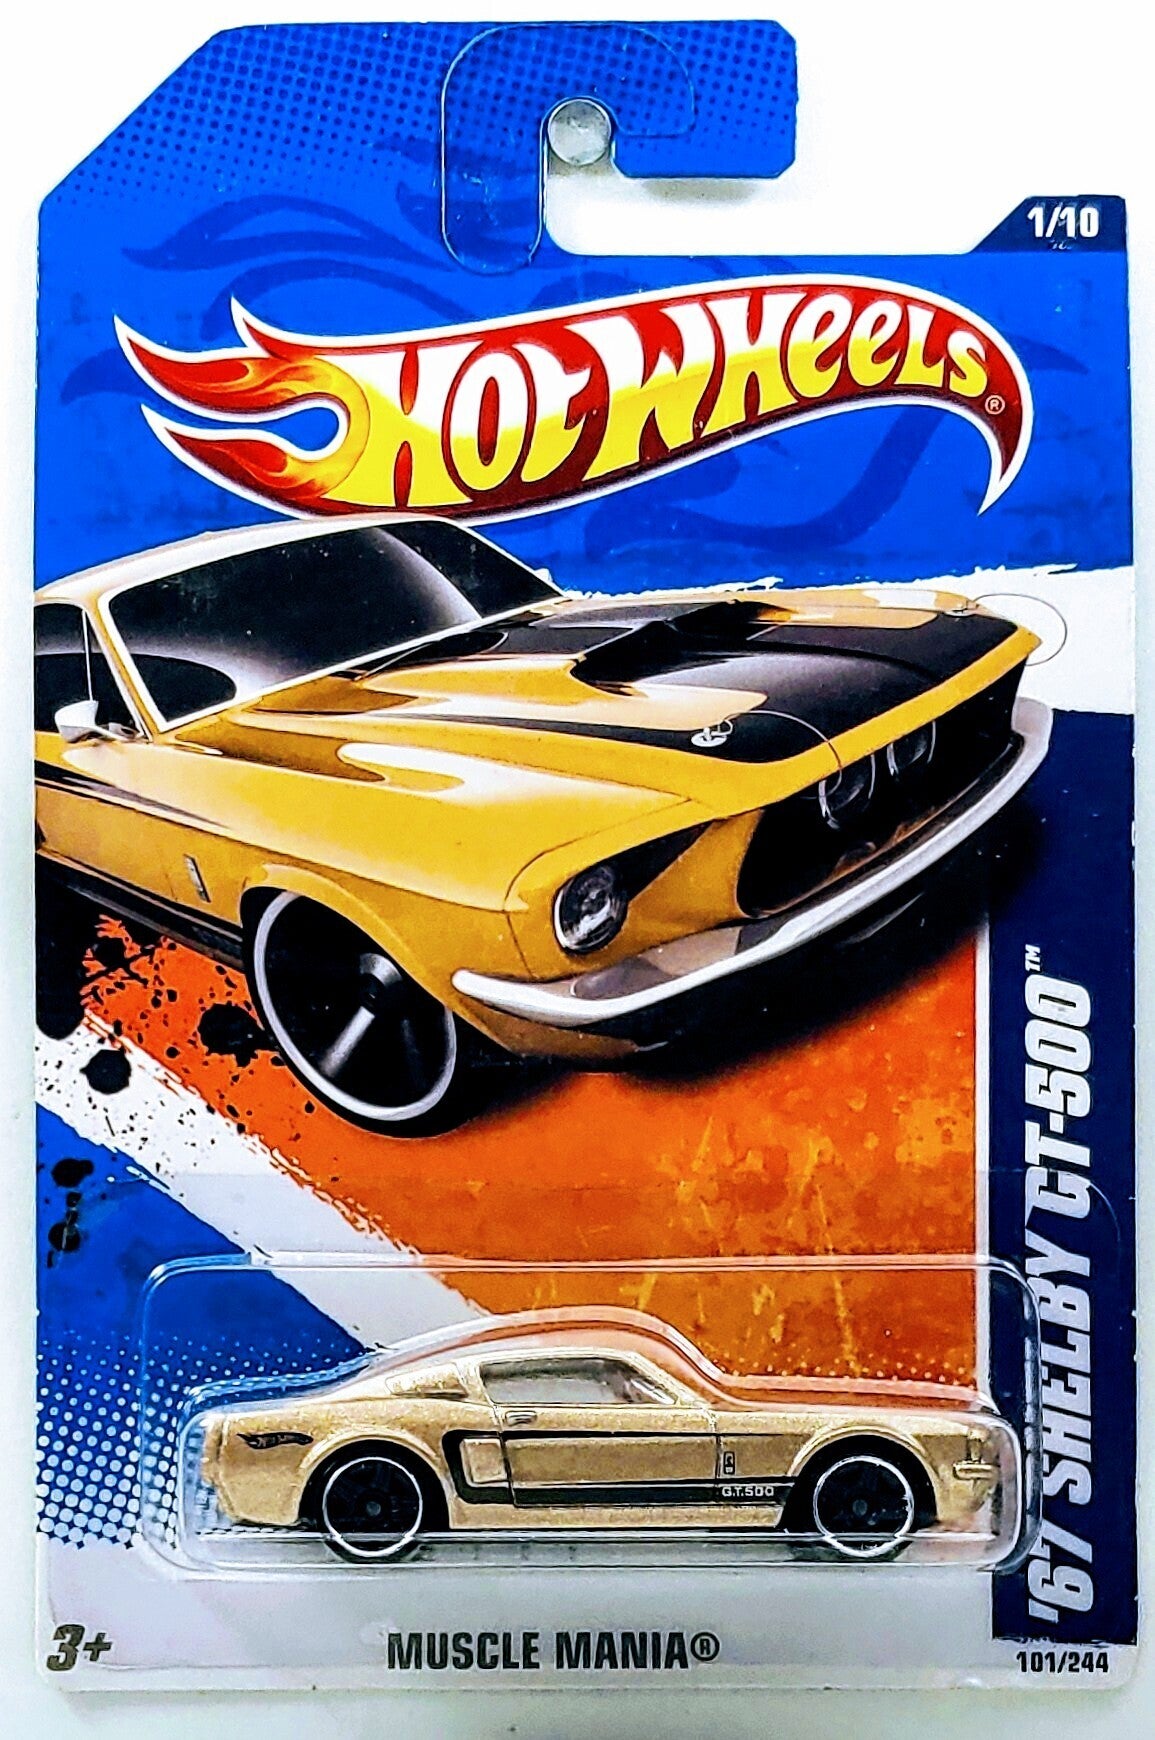 Hot Wheels 2011 - Collector # 101/244 - Muscle Mania 1/10 - '67 Shelby GT-500 - Gold - PR5 Wheels